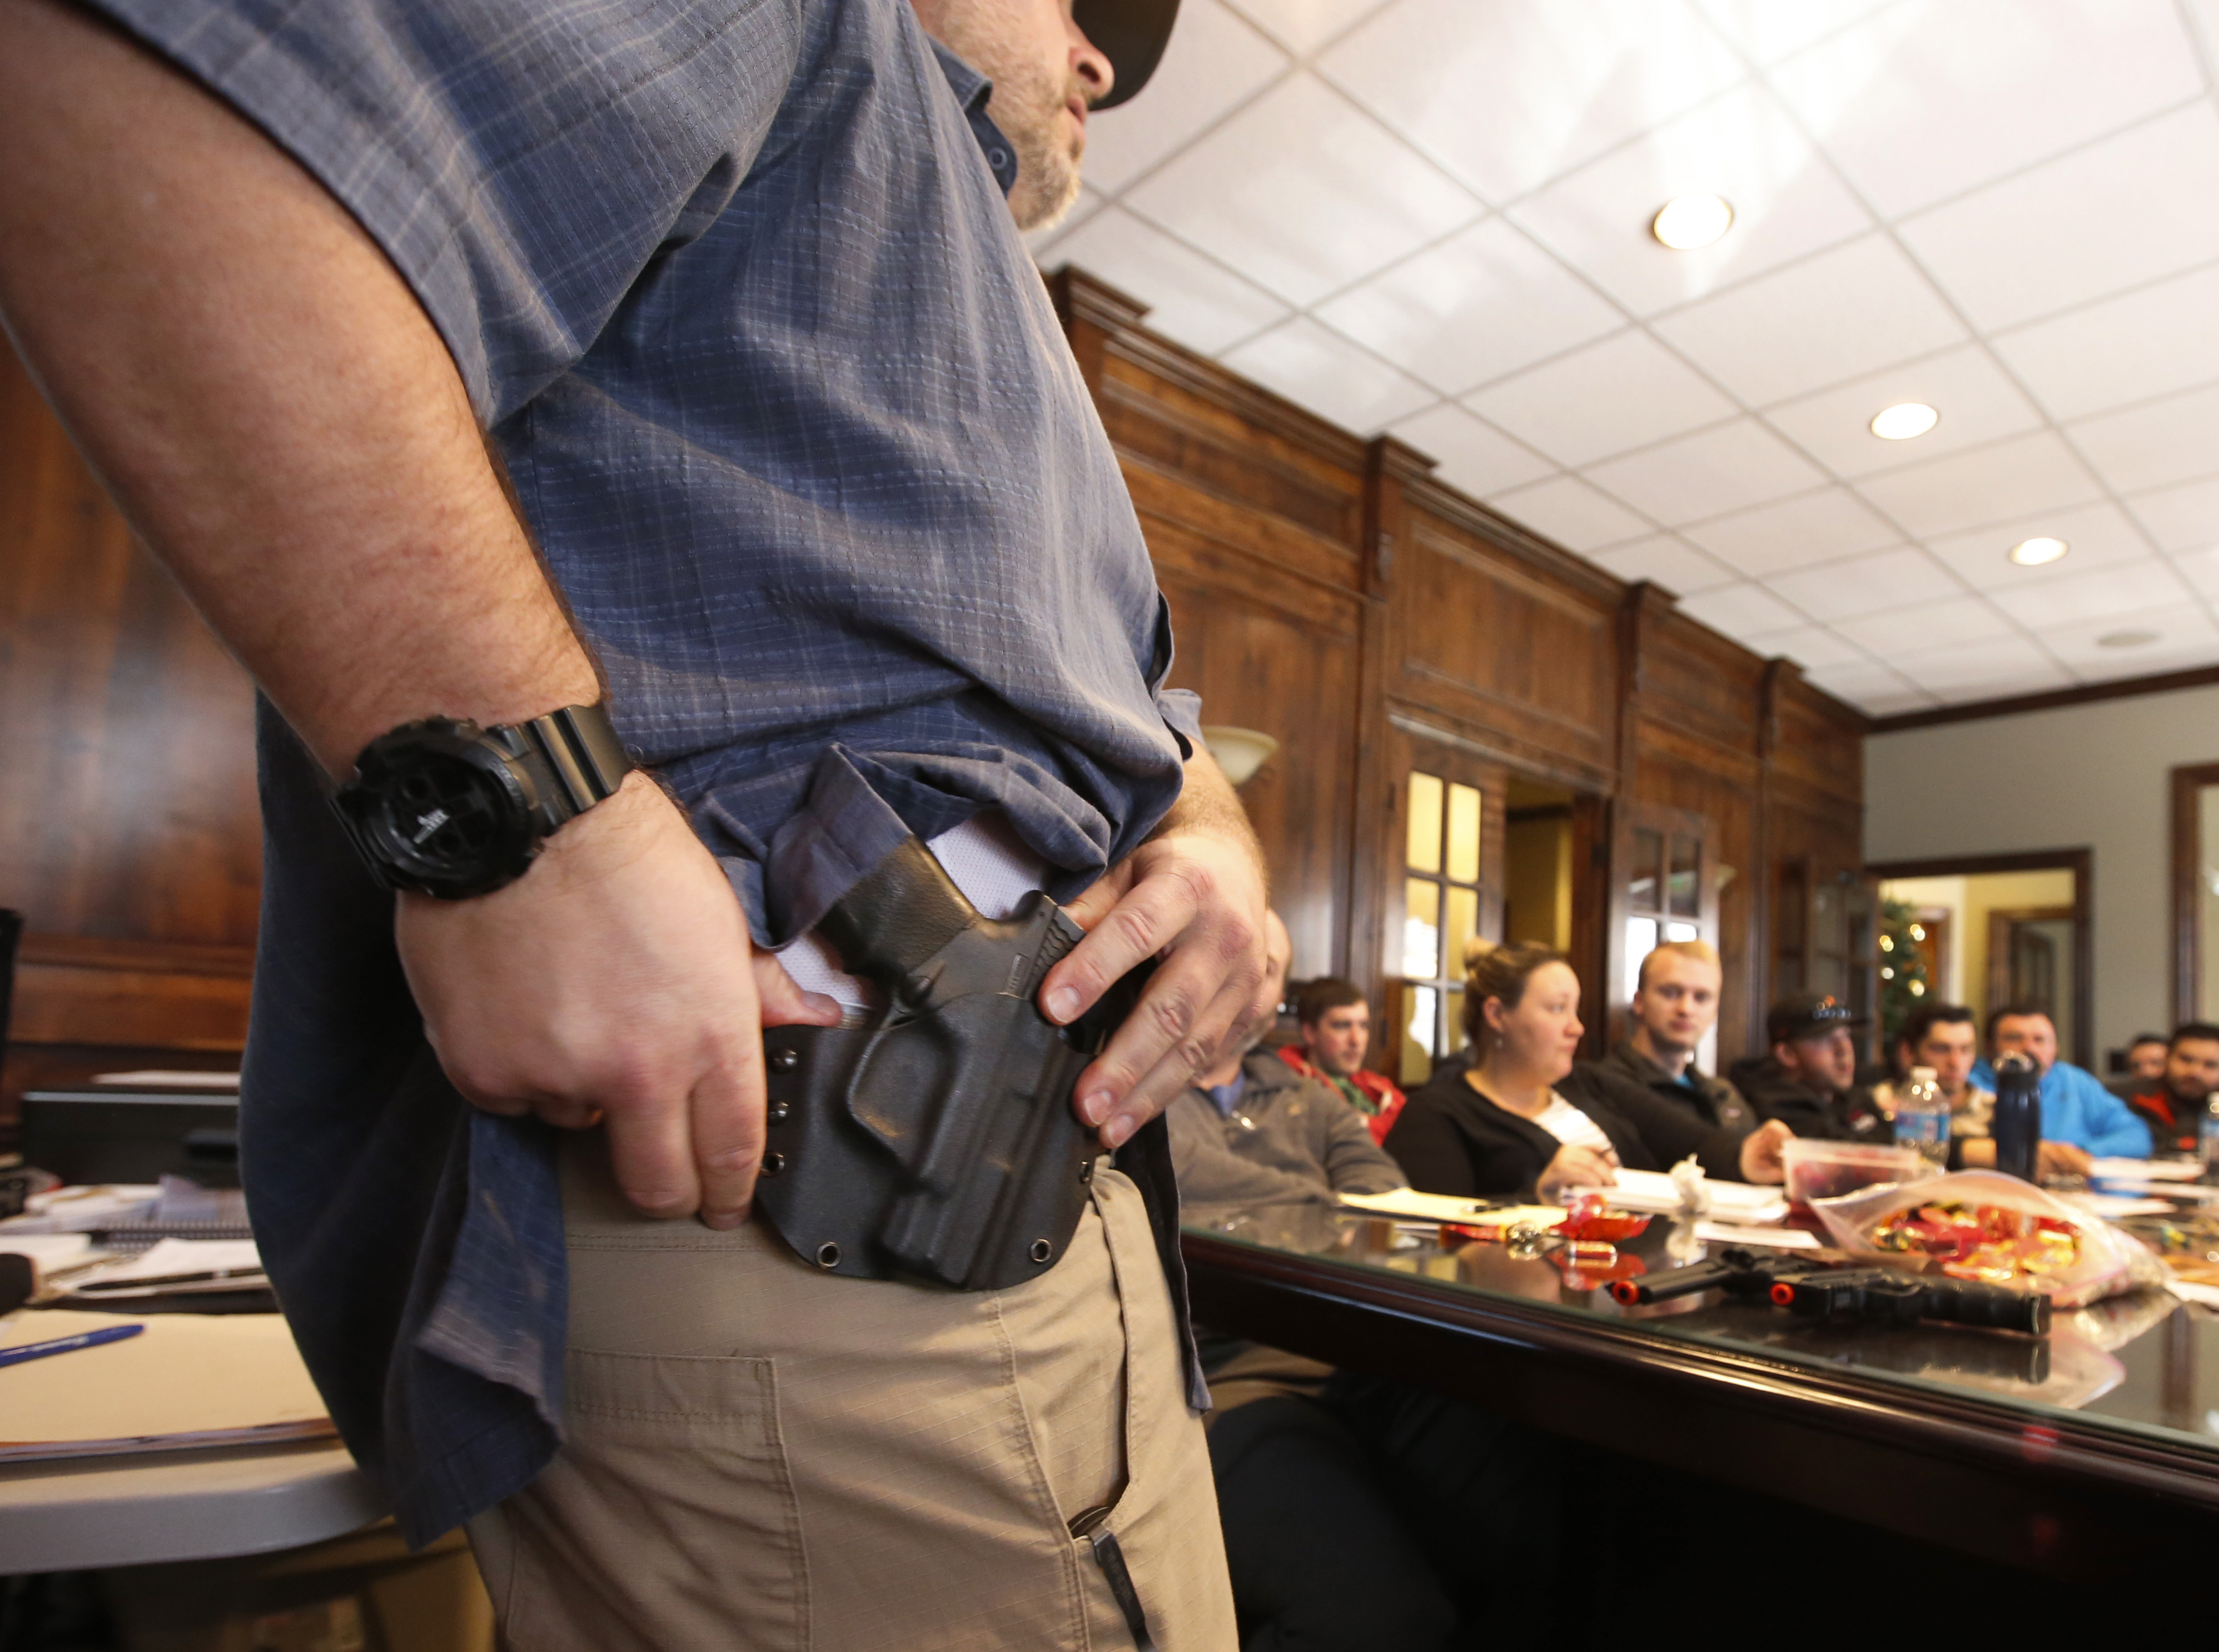 Gov. Wolf To Veto Permitless Concealed Carry Gun Bill Passed By Pennsylvania House As Local Authorities Sound Alarm